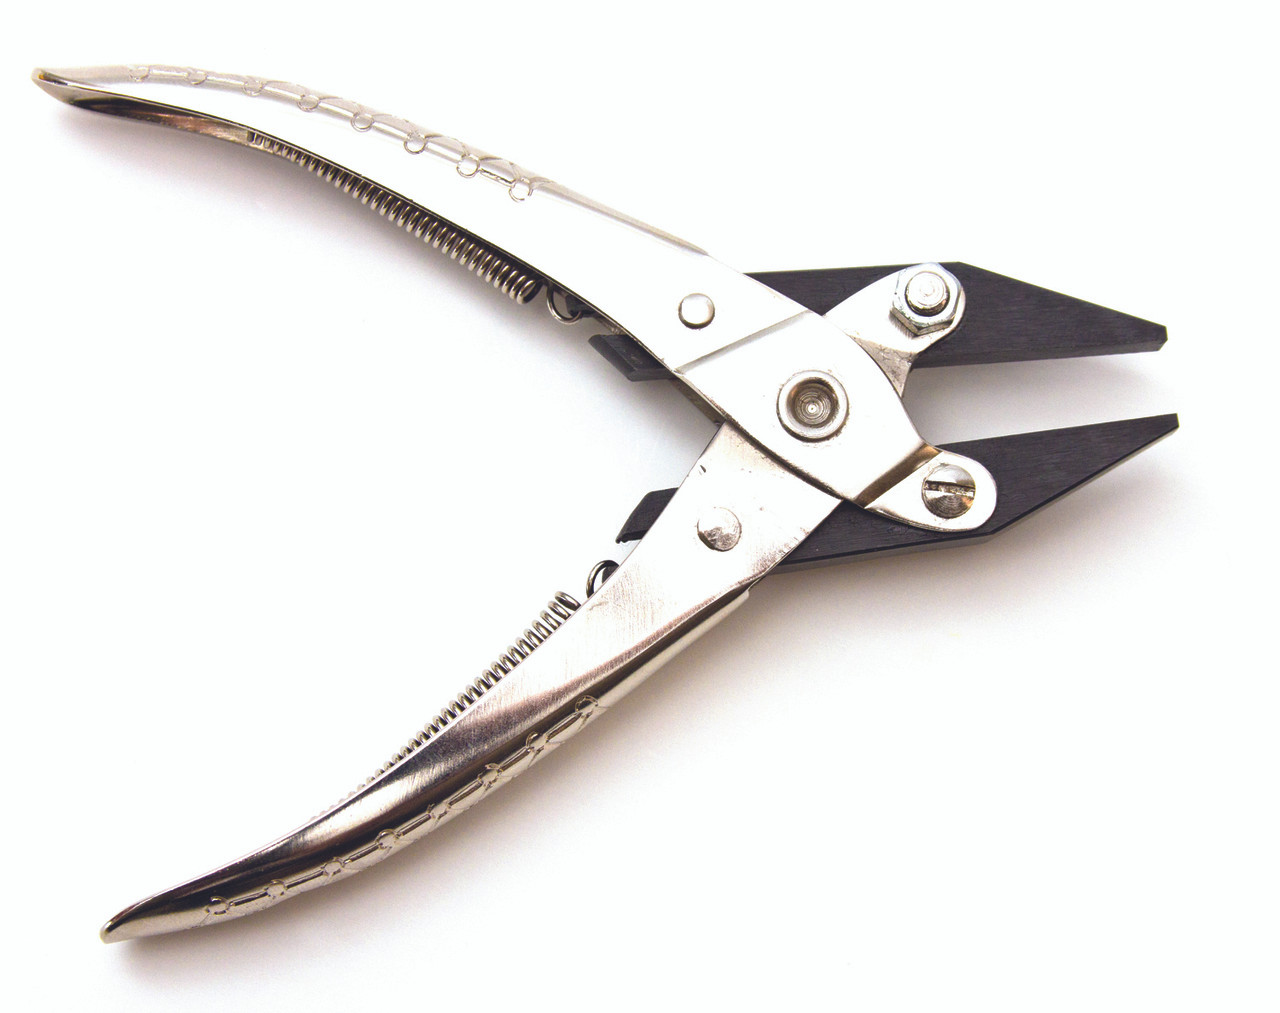 Parallel Action Chain Nose Smooth Jaw Pliers 5-1/2 with Spring